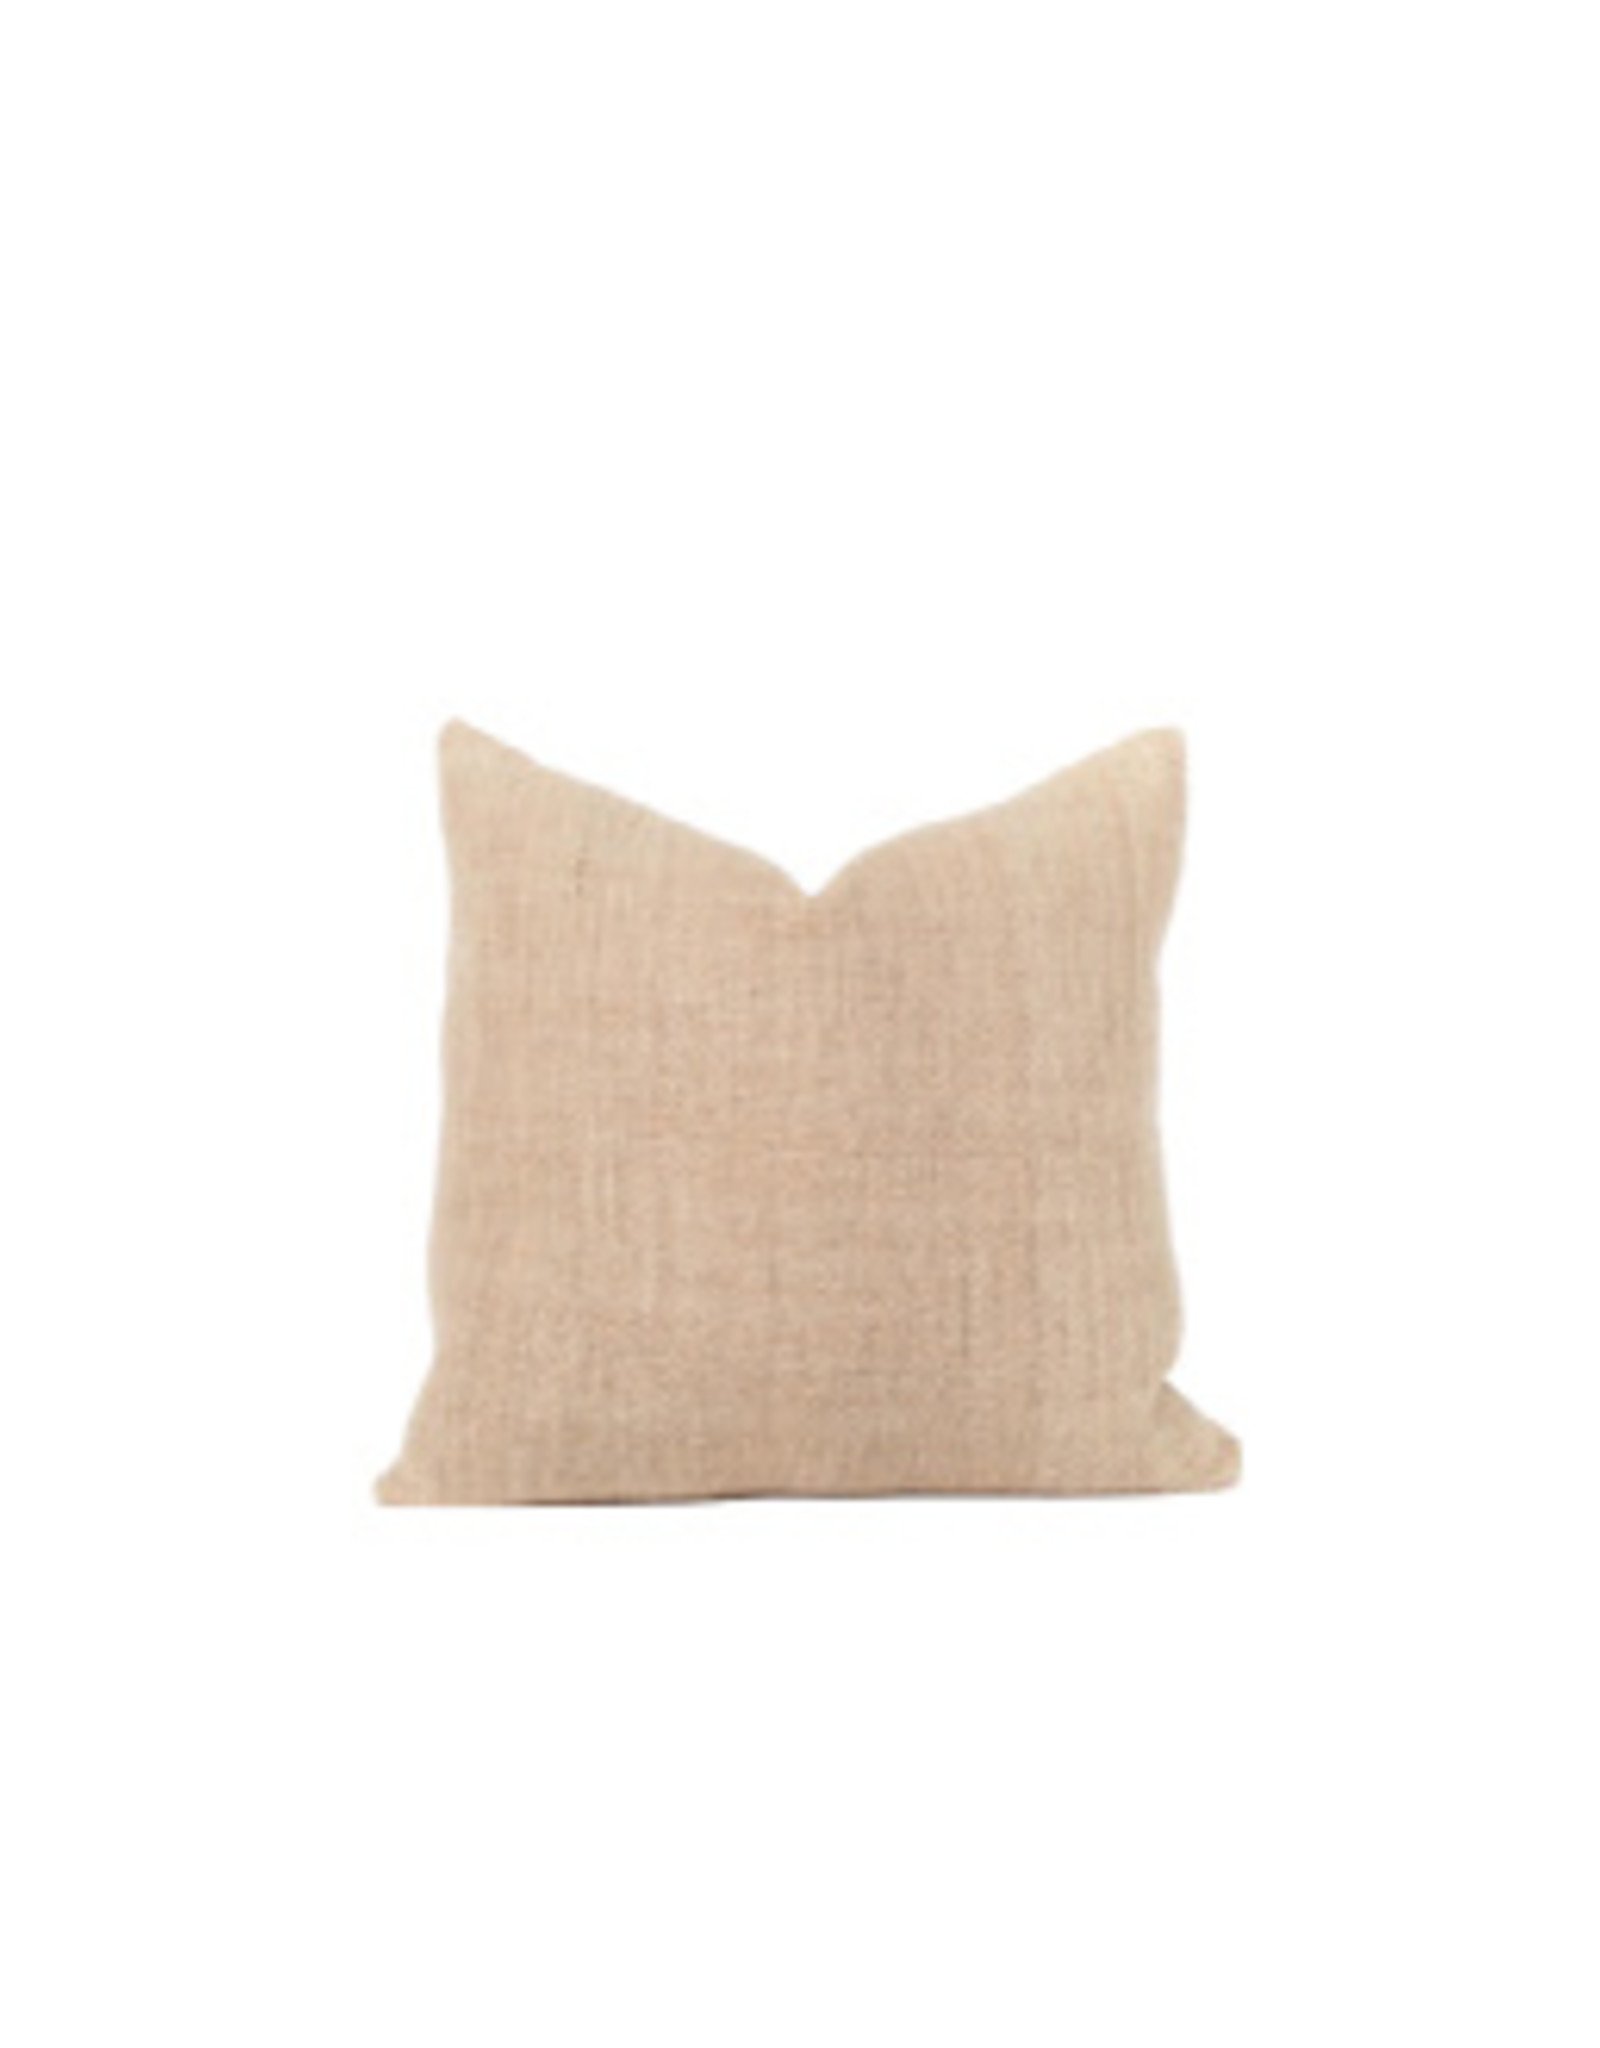 Oatmeal Pillow, Chile 26x26